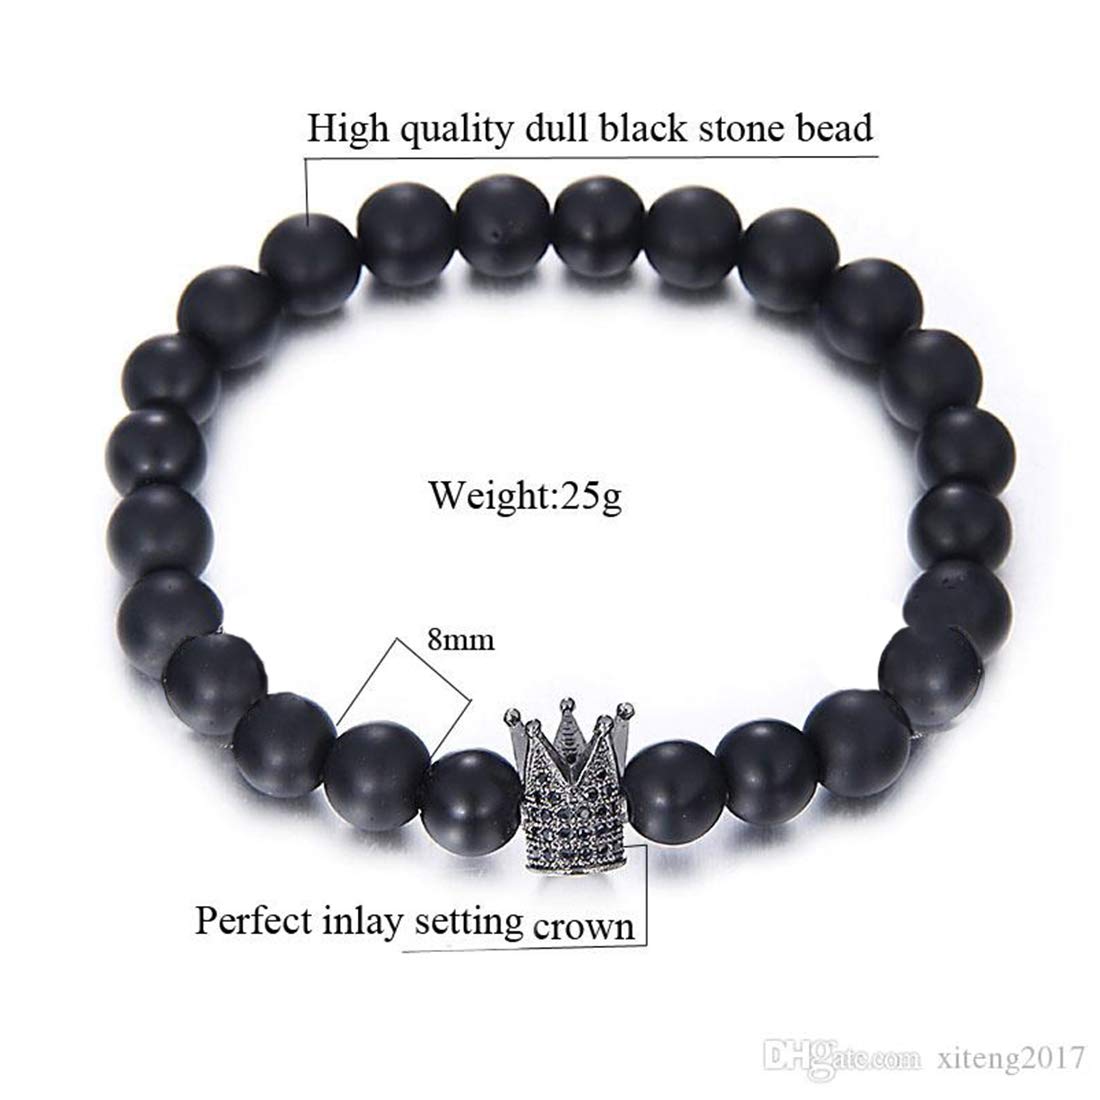 Yellow Chimes King Crown Natural Matte Black Volcanic Lava Stone Beads Stretchable Charm Bracelet for Men and Boy's